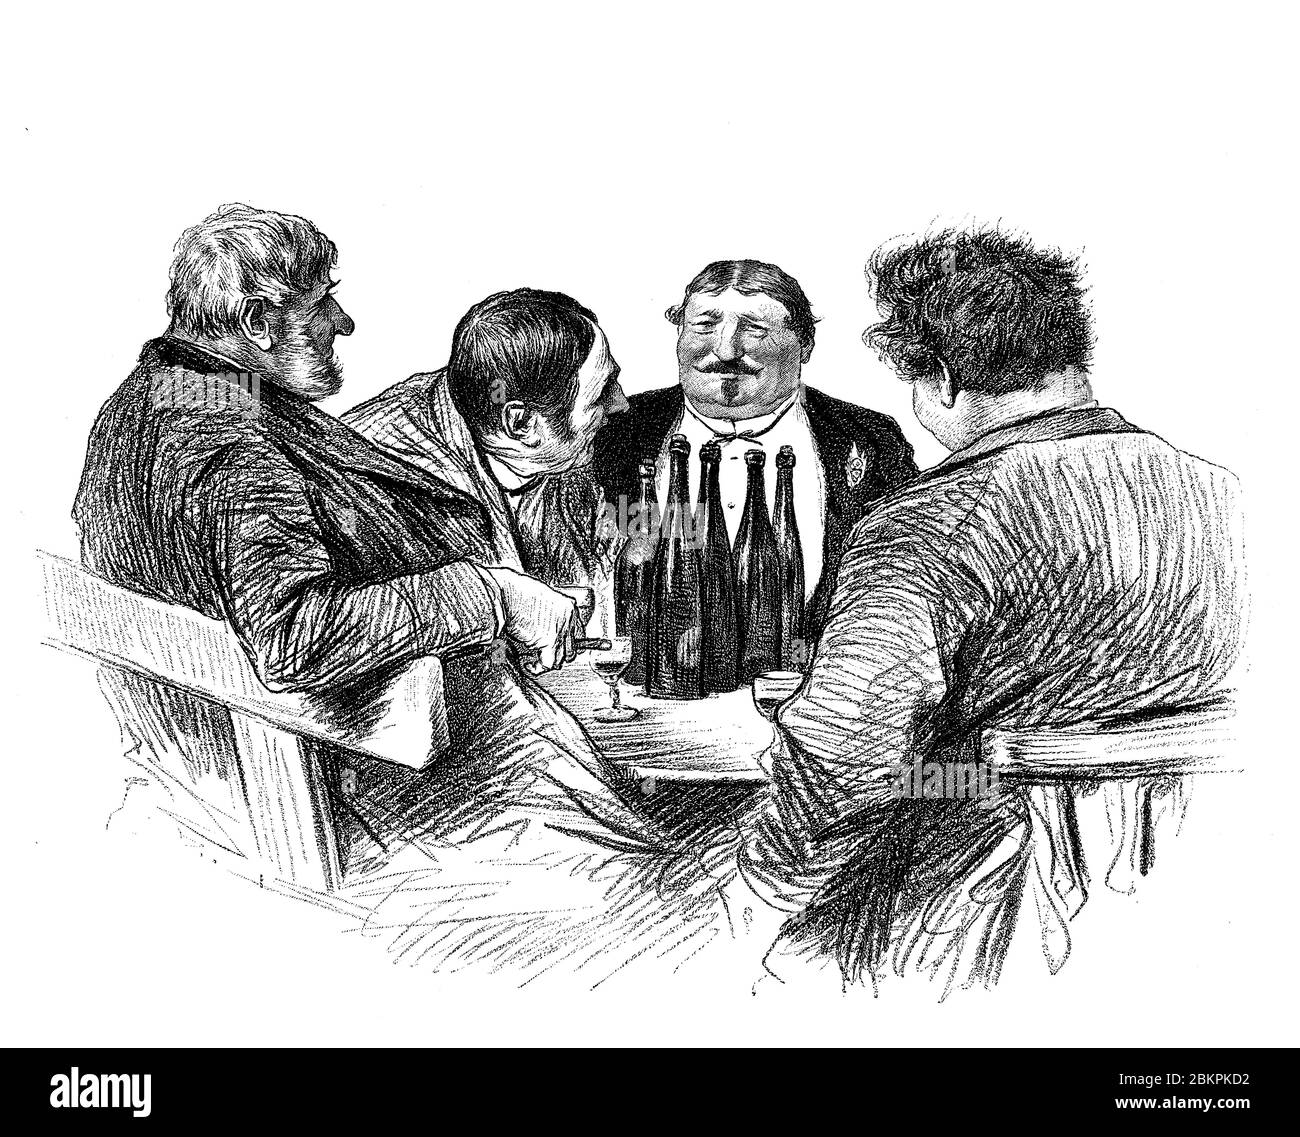 Humor and caricatures 19th century: four friends at the table inn drinking liberally several bottles of wine and have fun together Stock Photo